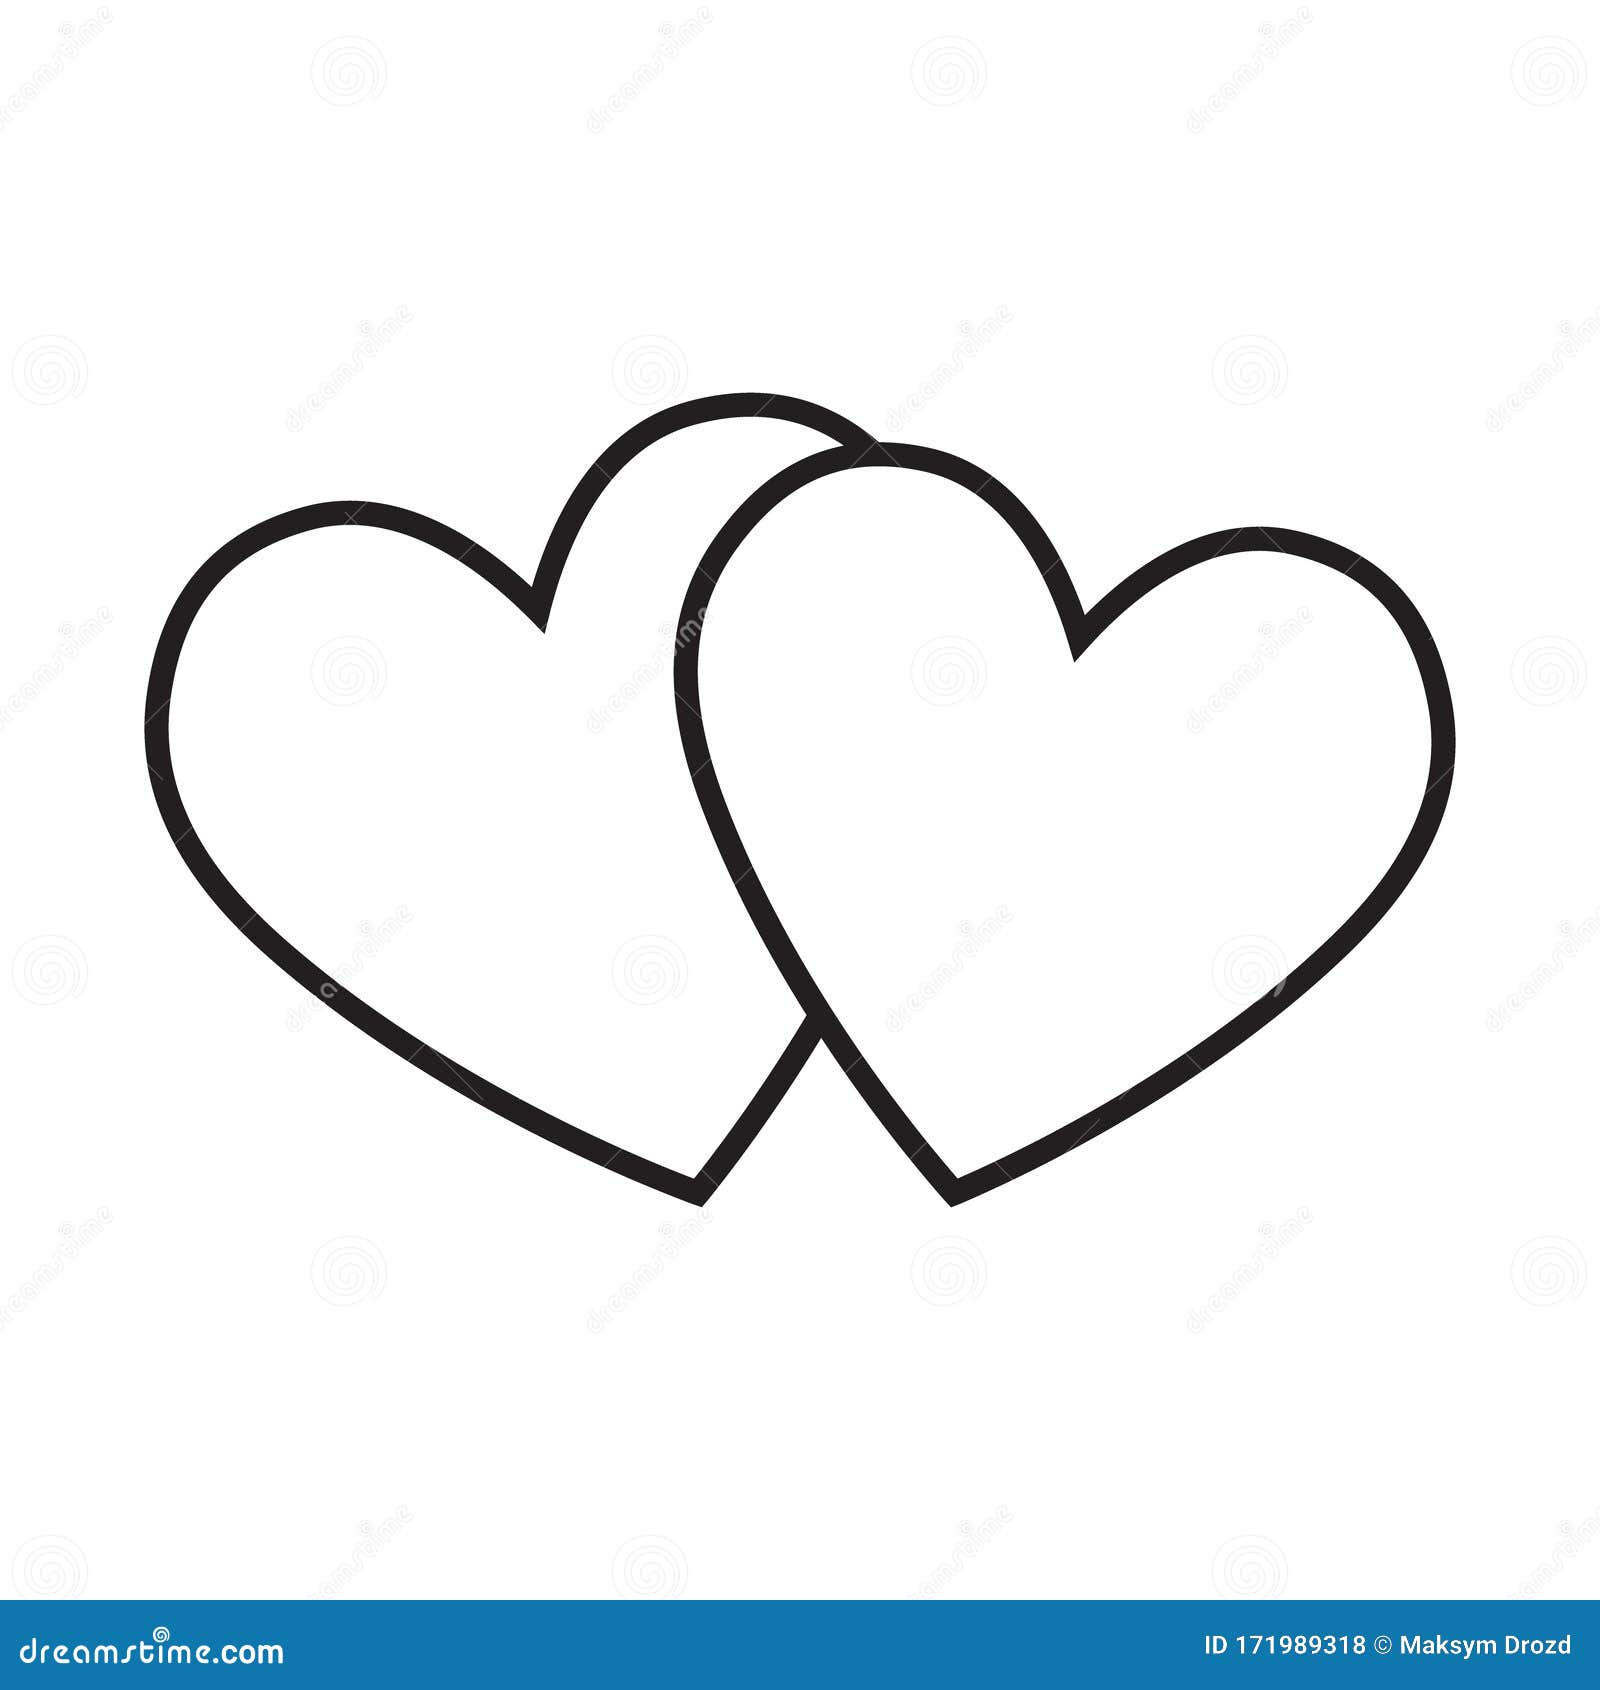 Squiggley Heart Stamp